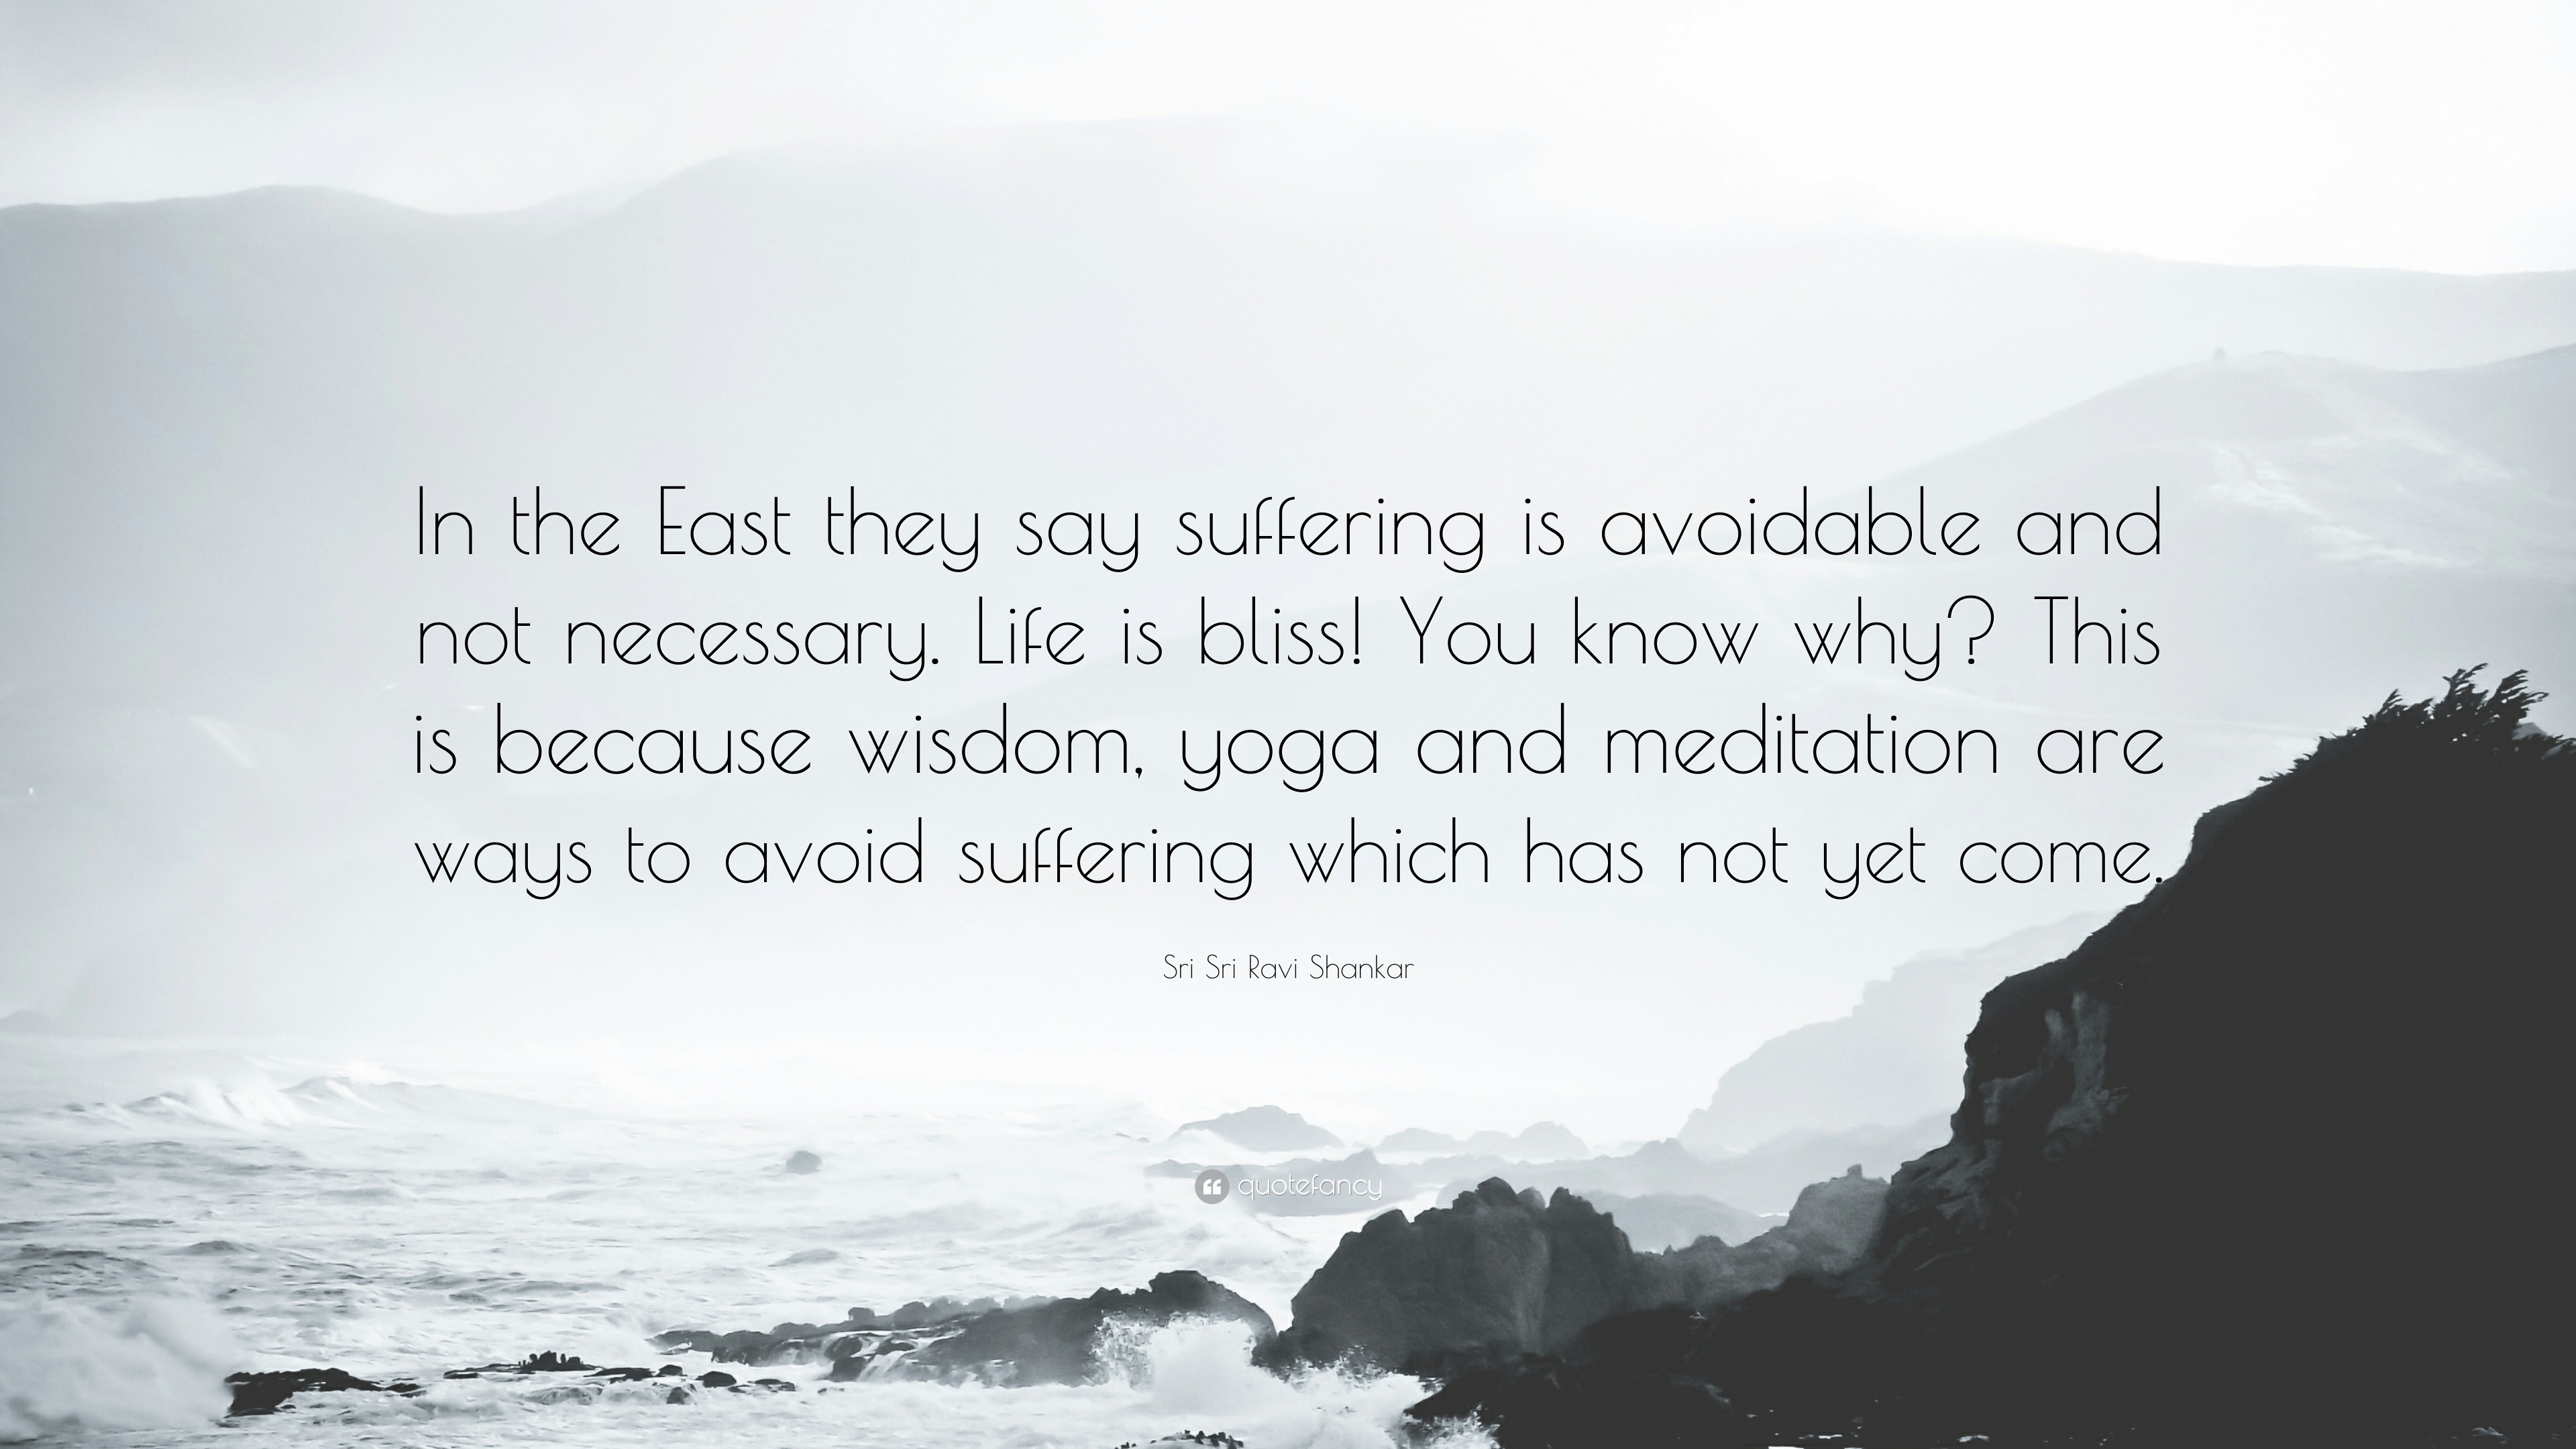 Sri Sri Ravi Shankar Quote “In the East they say suffering is avoidable and